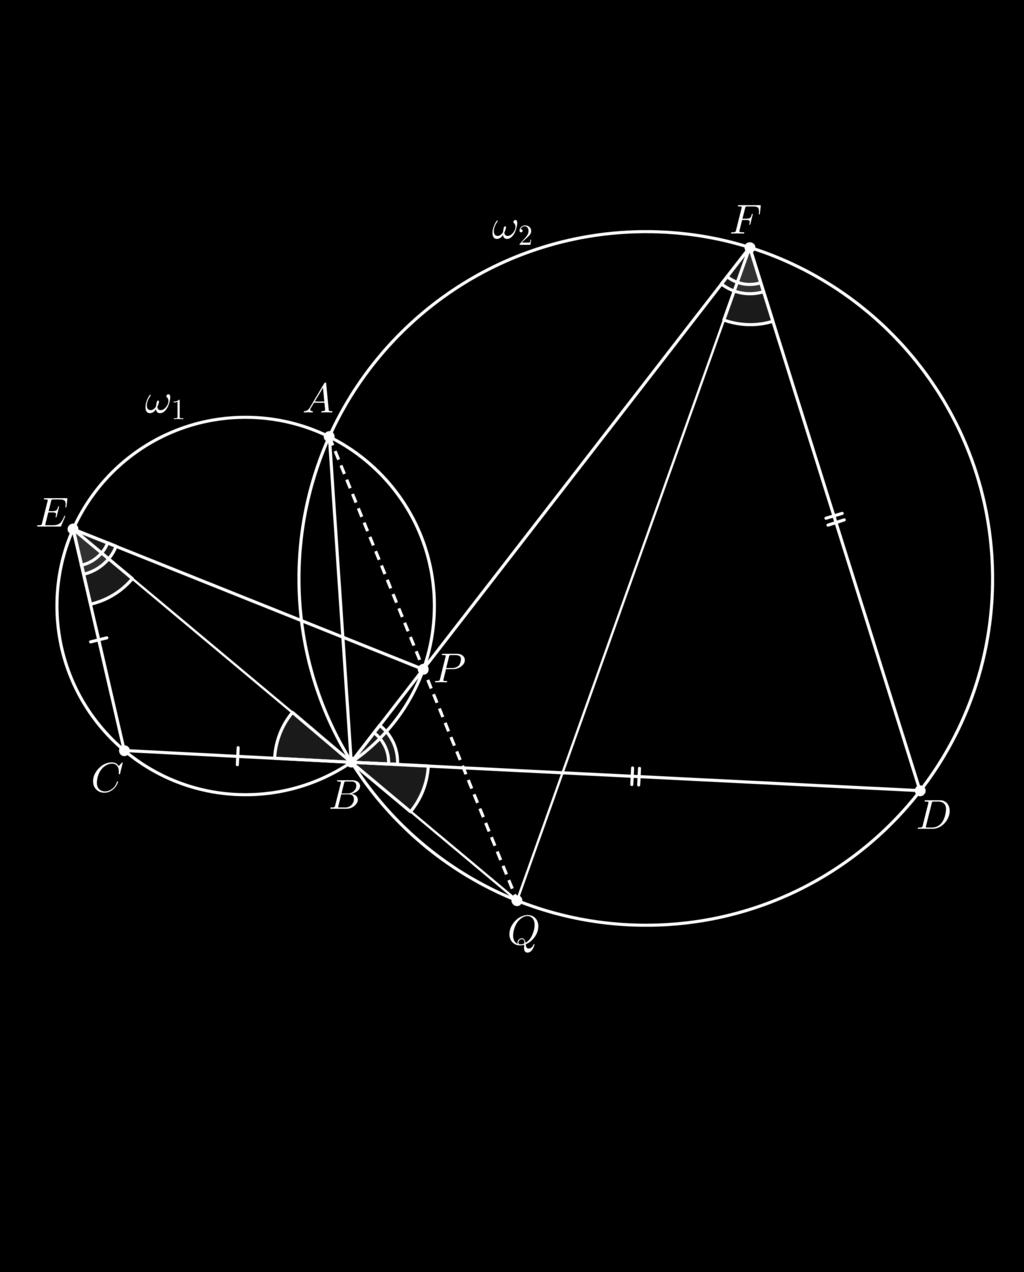 2. Two circles ω 1, ω 2 intersect at A, B. An arbitrary line through B meets ω 1, ω 2 at C, D respectively. The points E, F are chosen on ω 1, ω 2 respectively so that CE = CB, BD = DF.